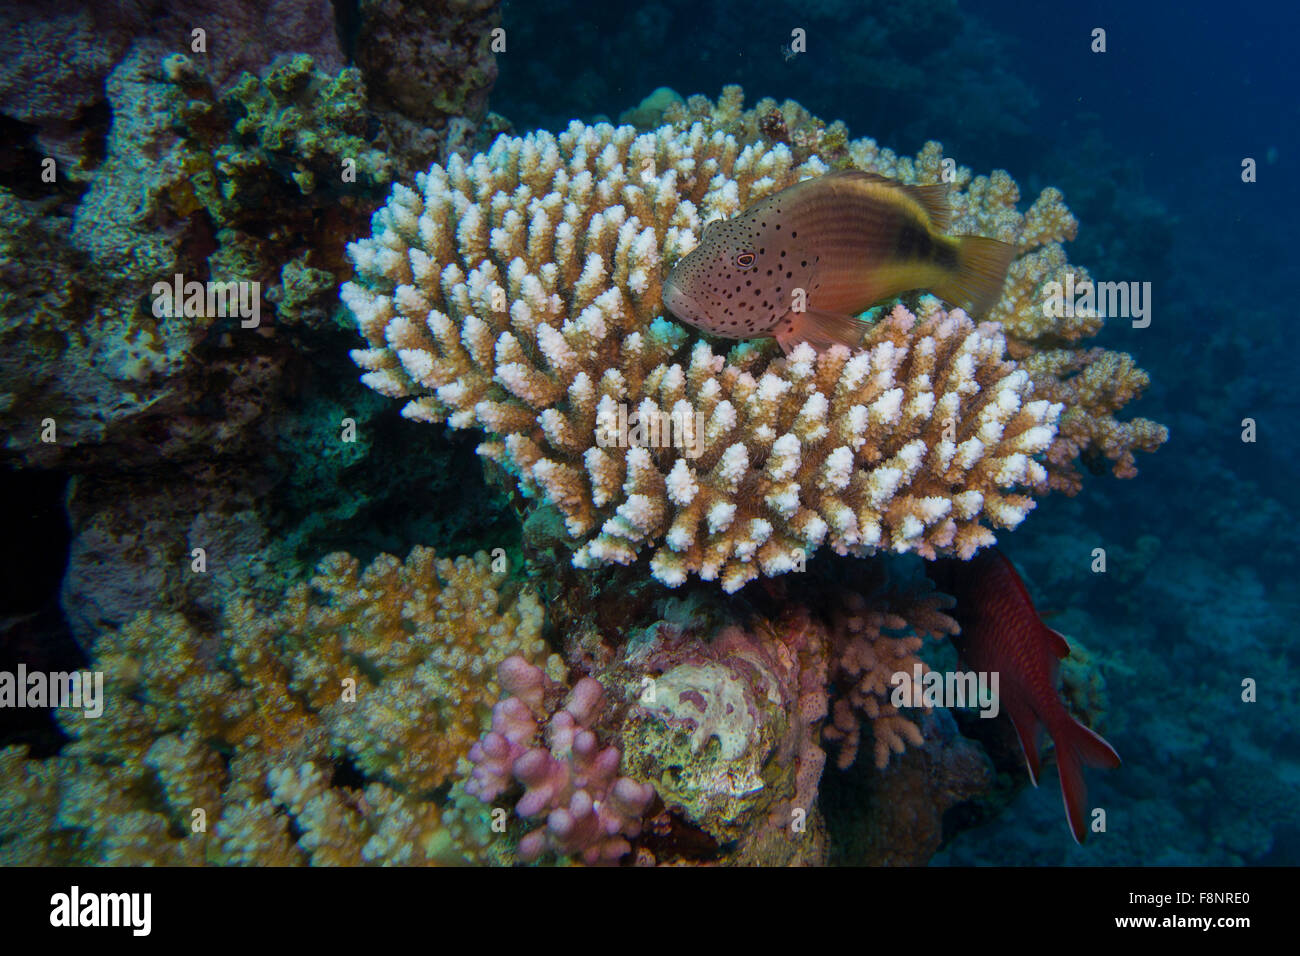 The black-sided hawkfish or freckled hawkfish, Paracirrhites forsteri, sitting on a staghorn coral, Acropora spec., Red Sea. Stock Photo